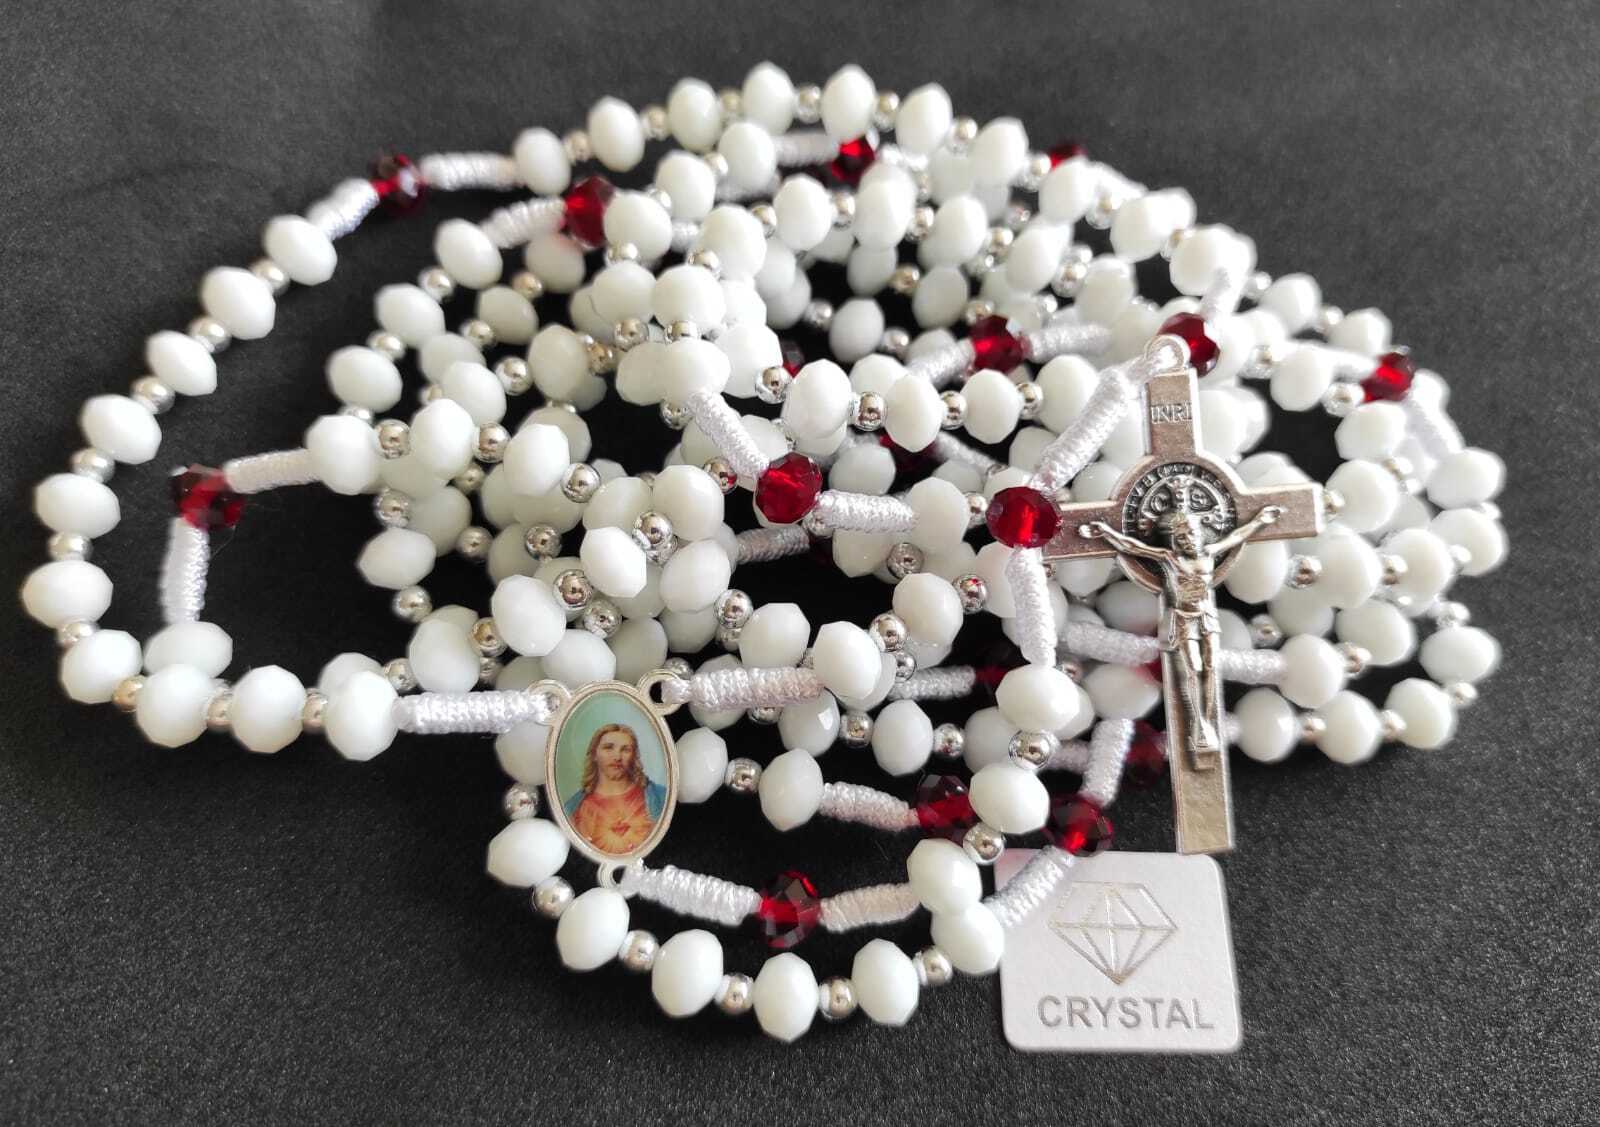 1000 Thank you Jesus rosary Chaplet One Thousand Thank You Jesus 20 Decade 